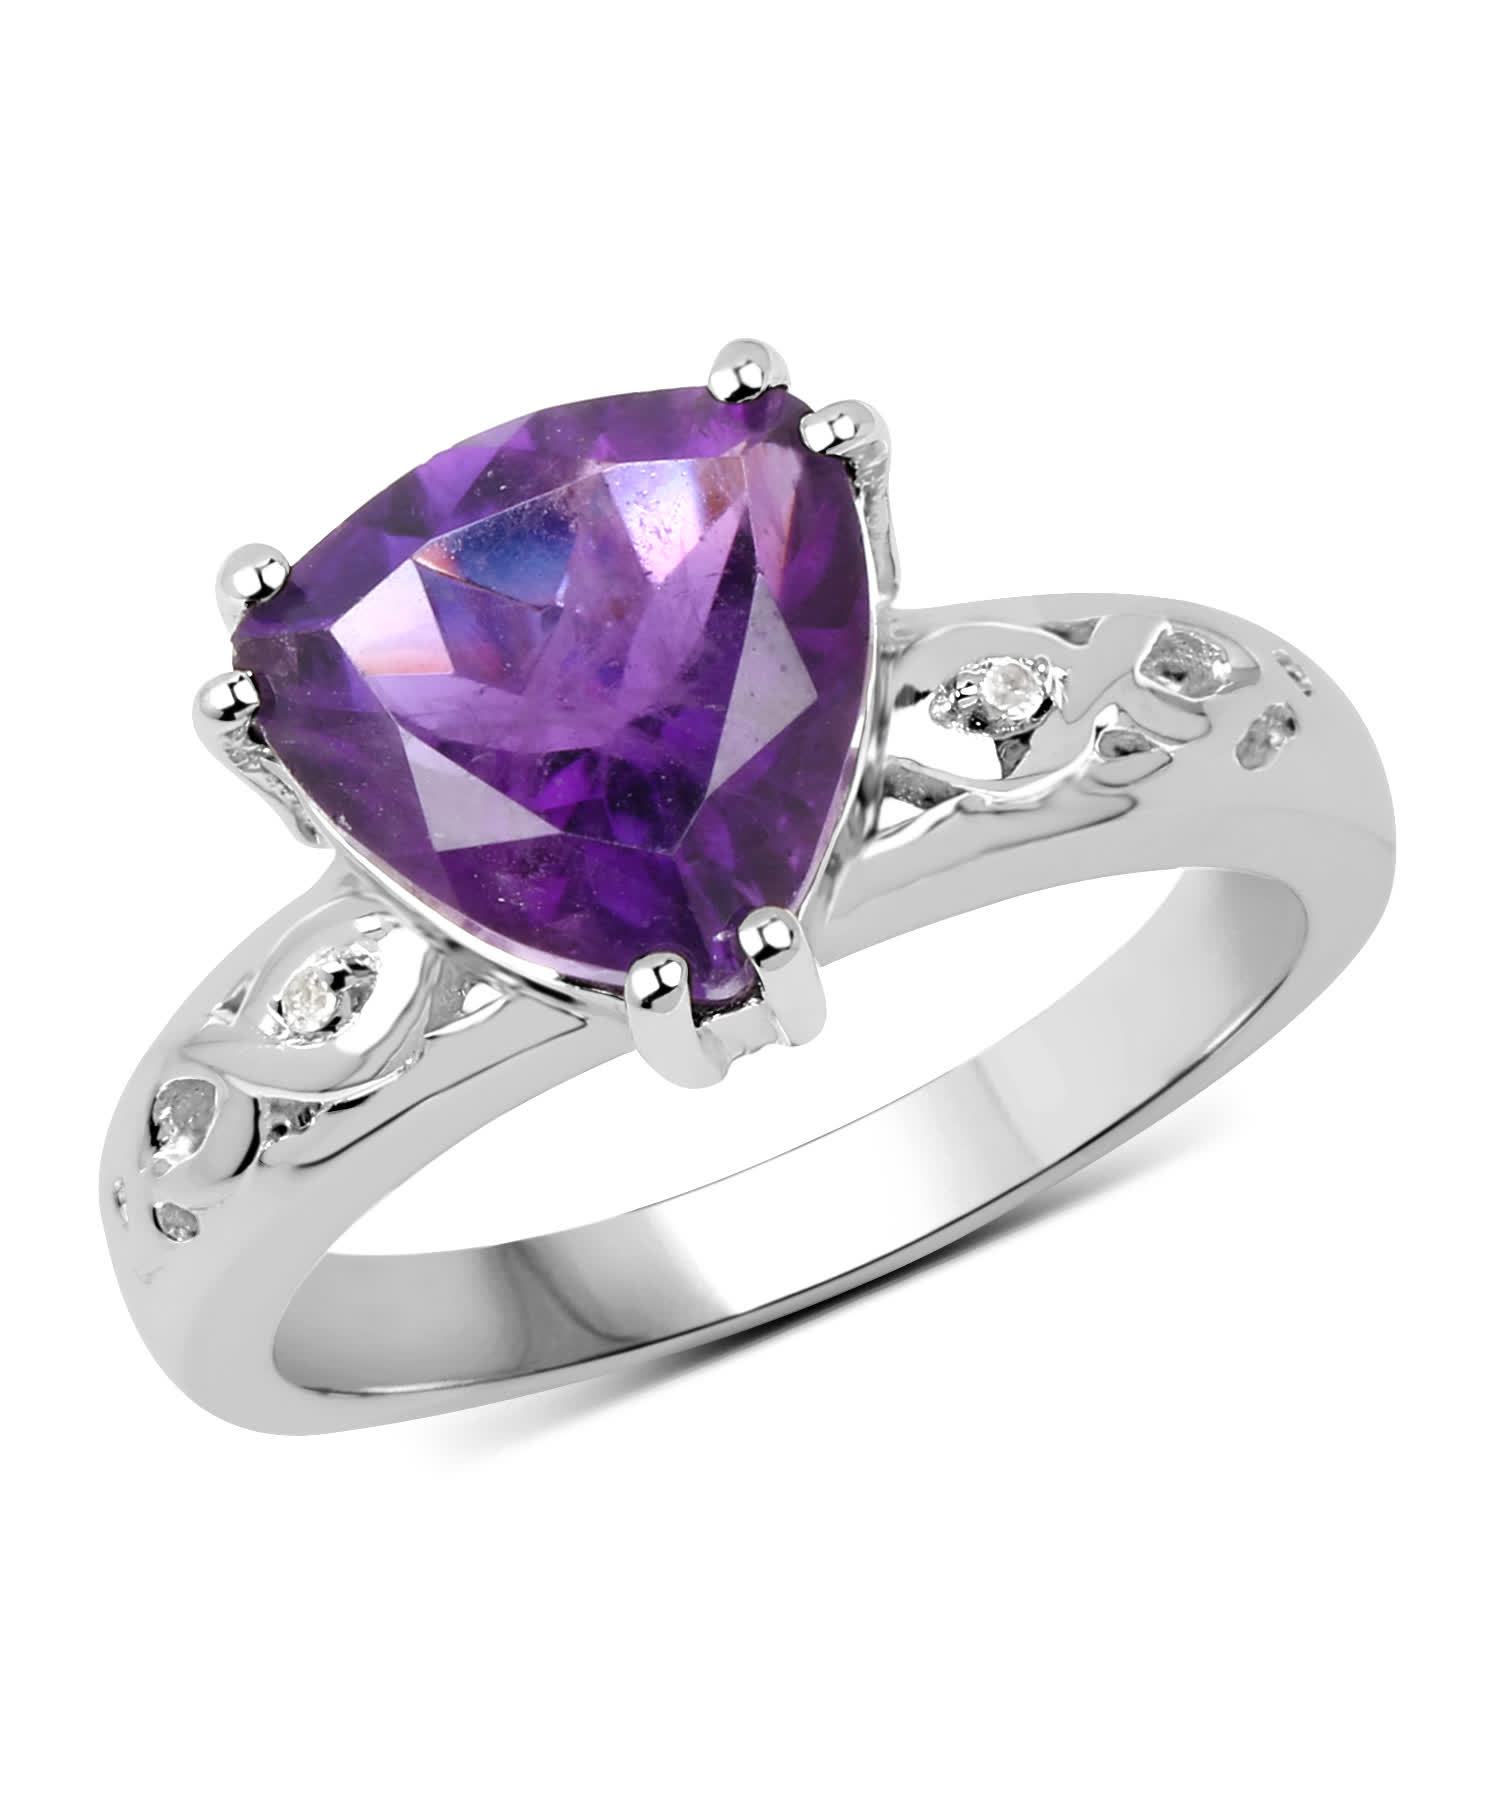 2.71ctw Natural Amethyst and Topaz Rhodium Plated 925 Sterling Silver Triangle Ring View 1